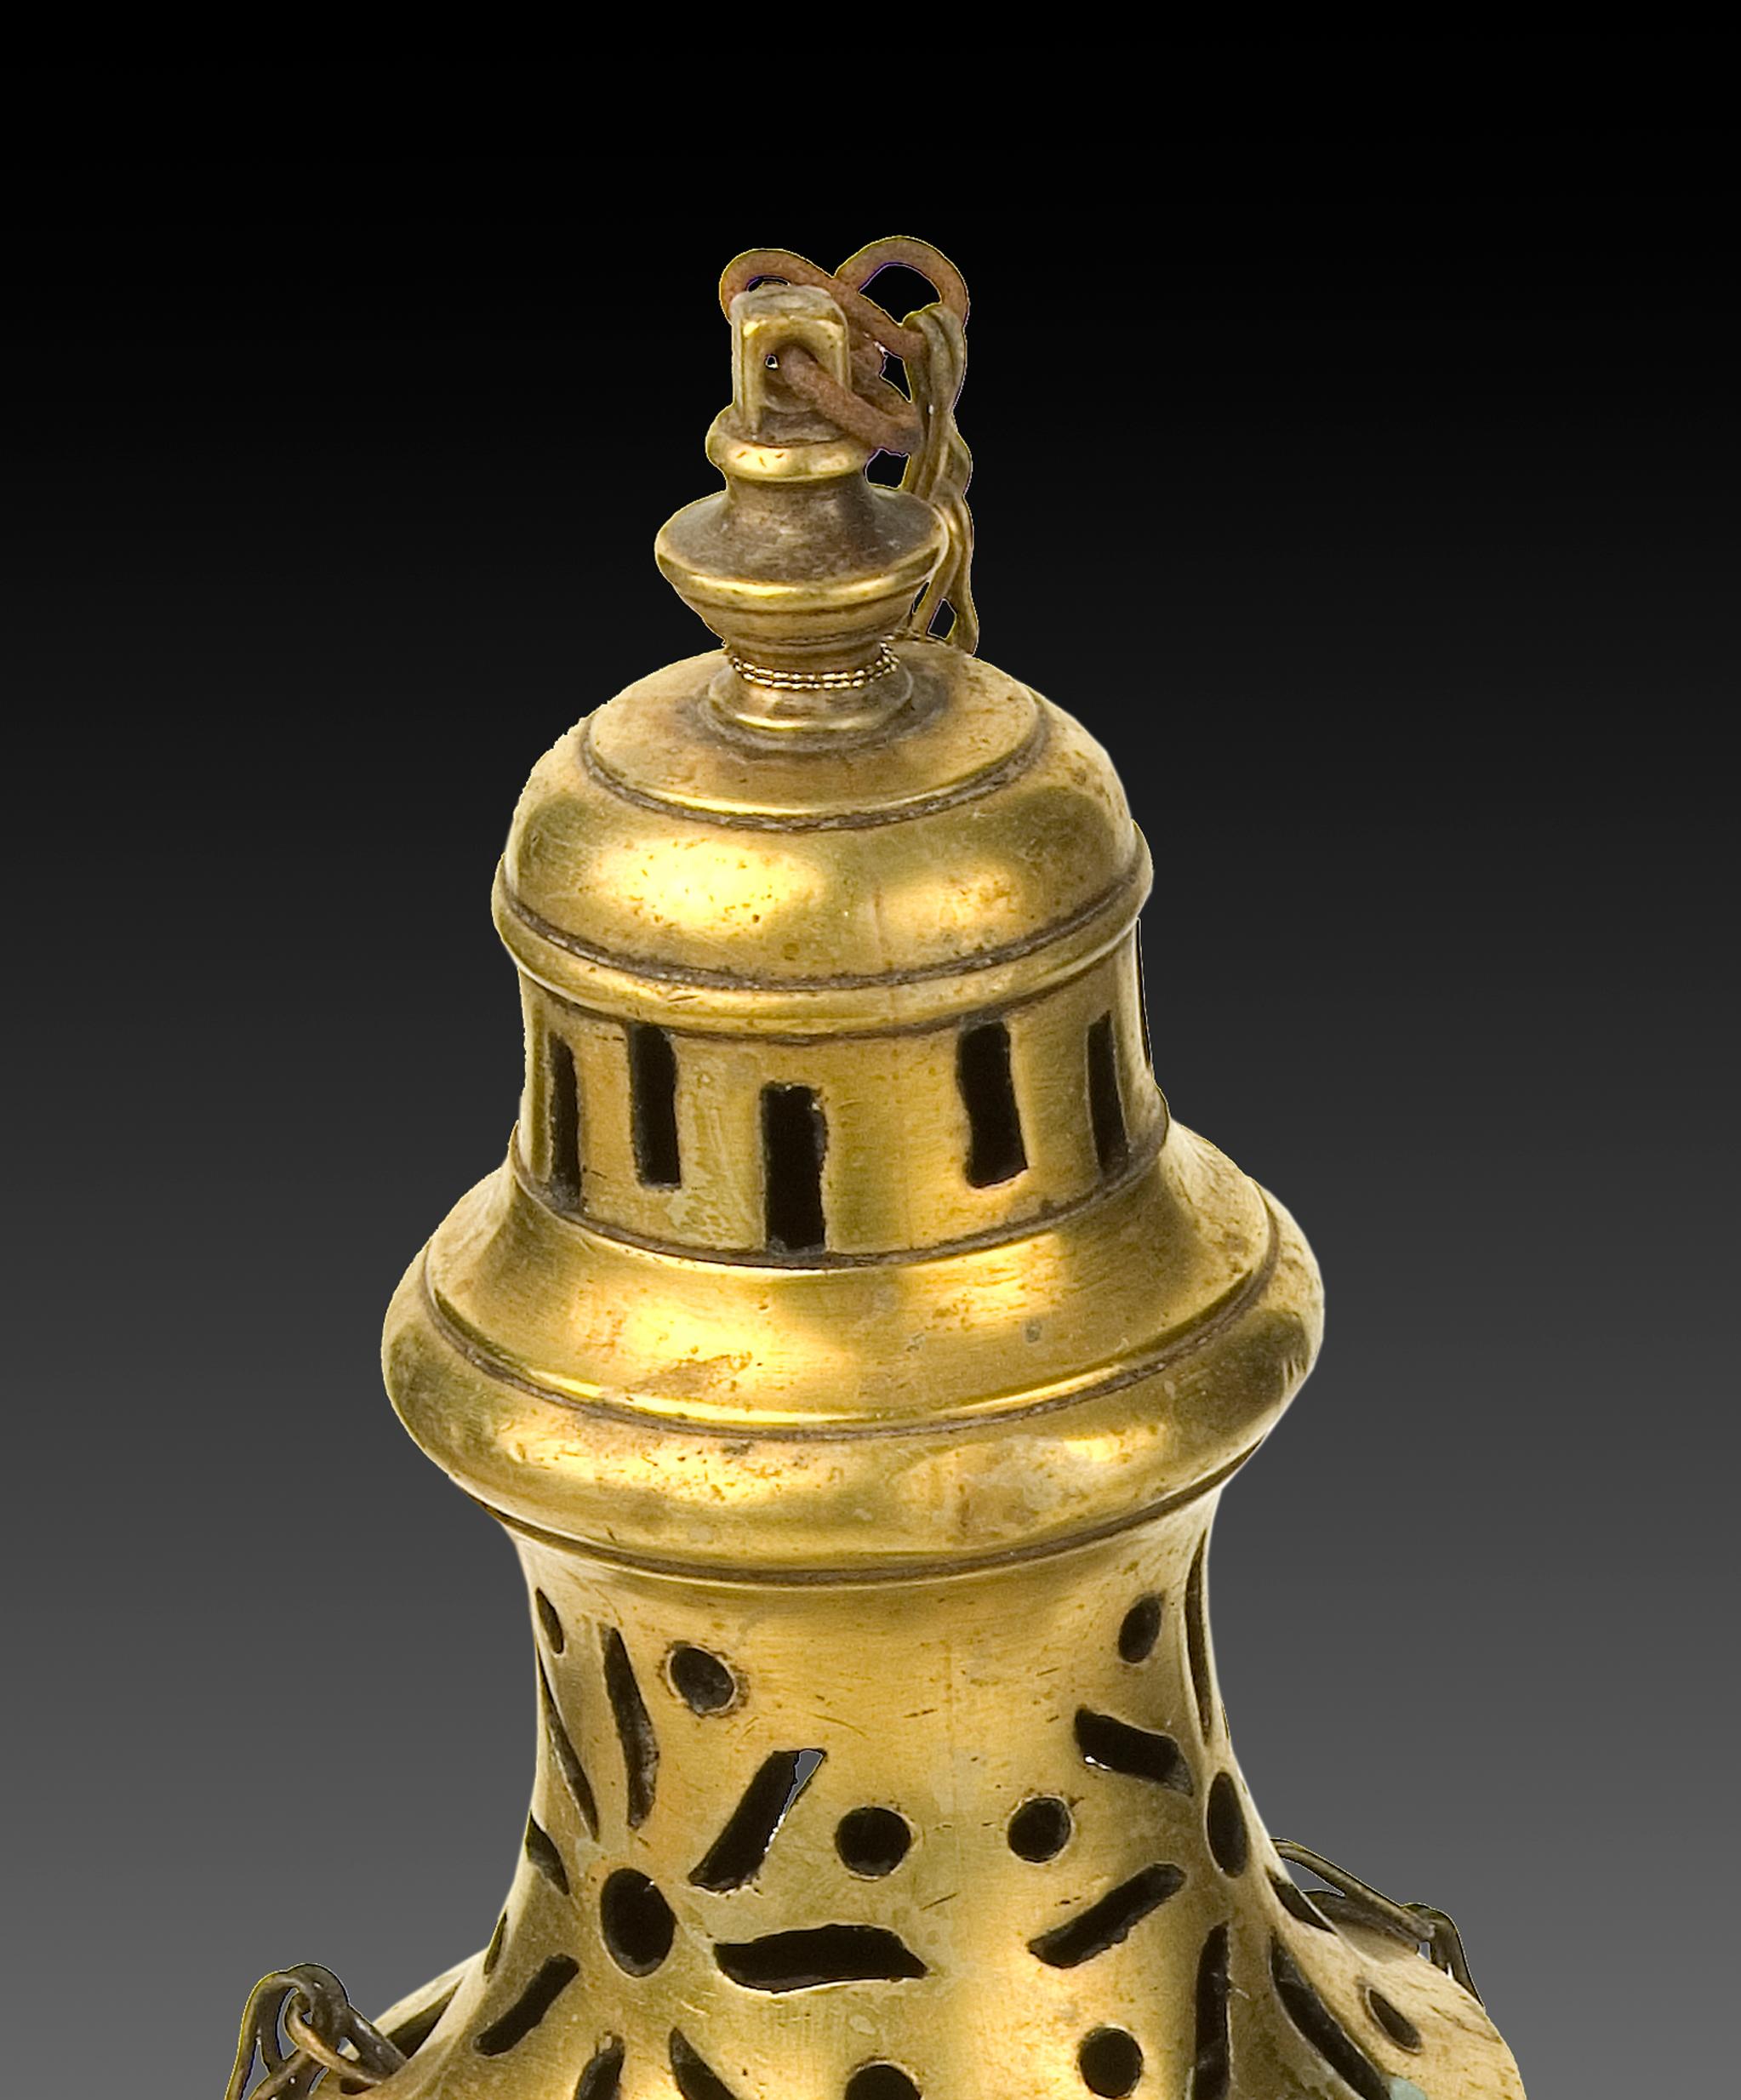 Censer. Bronze. XIX century. 
Bronze censer with circular base and cup shape with lid of elaborate lines and simple openwork elements inspired by antique pieces. It has metallic chains that join it to the usual piece with ring. Certain lines and